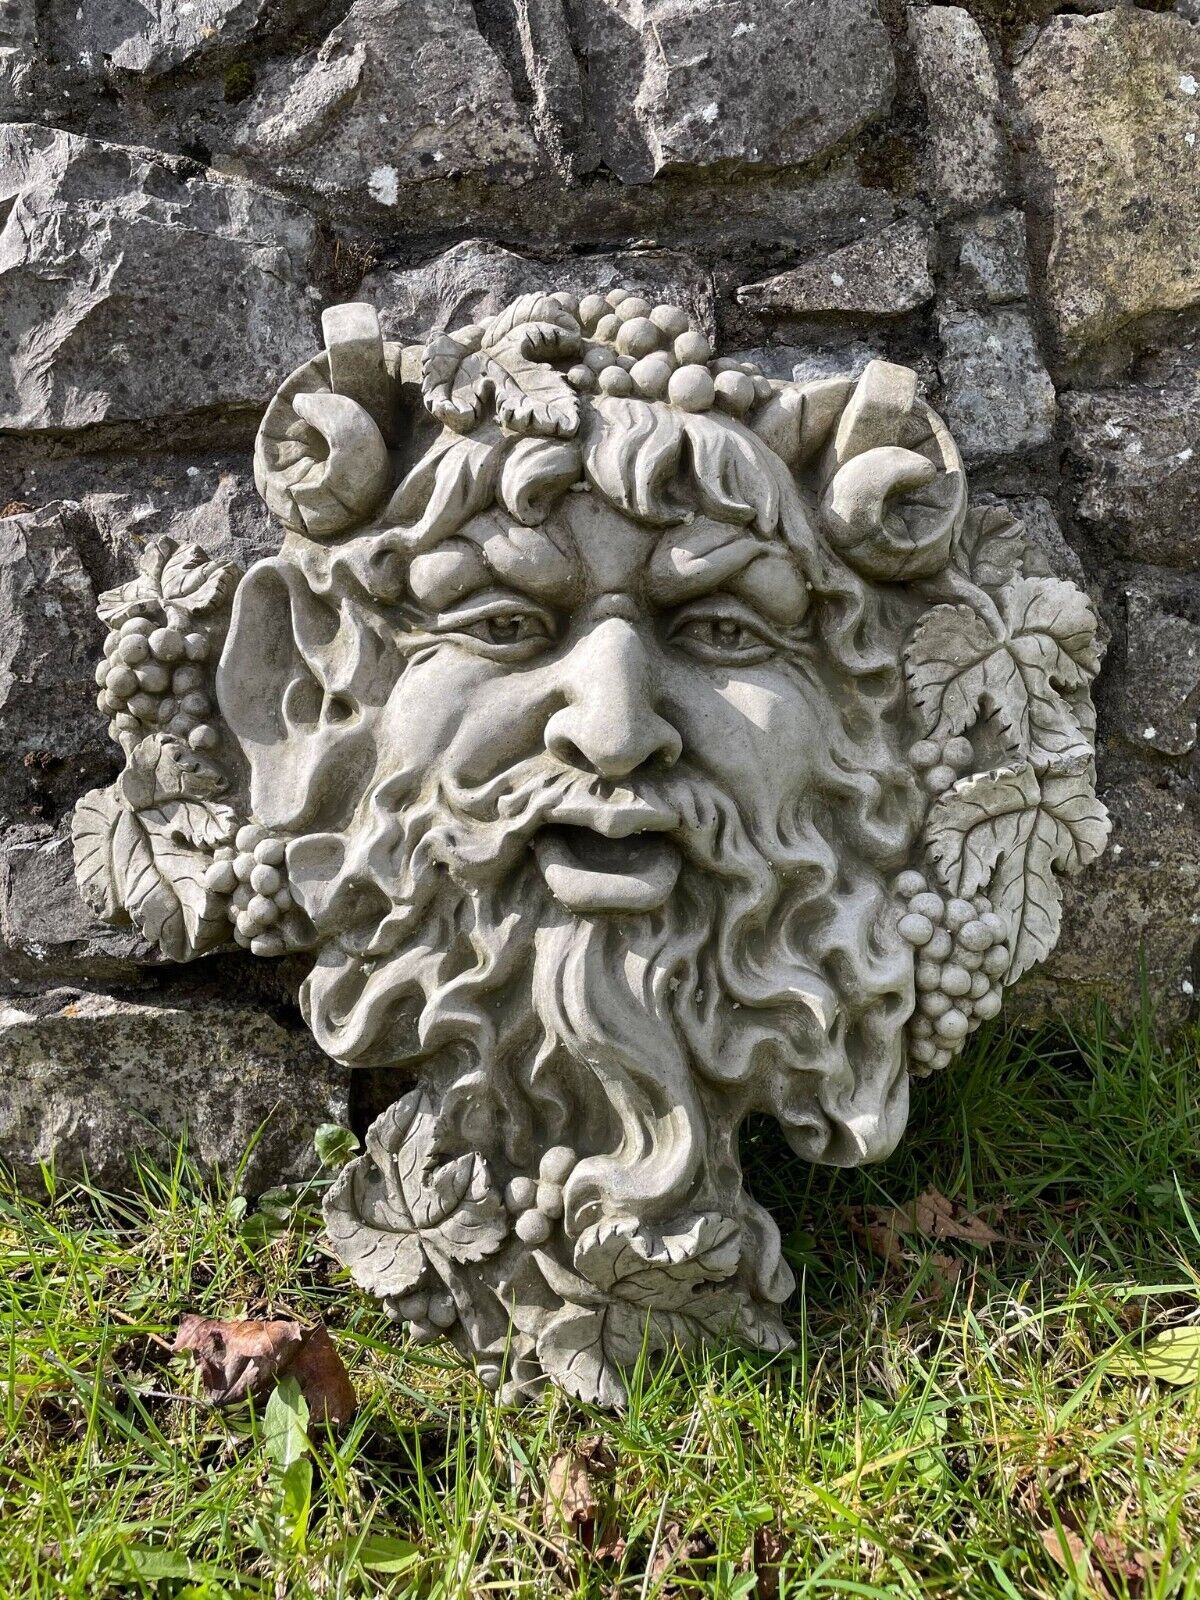 A large bachus head hanging plaque adorned with berries and leaves with flowing beard and rams horns. Situated leaning on the wall of a British garden with green grass in the foreground.